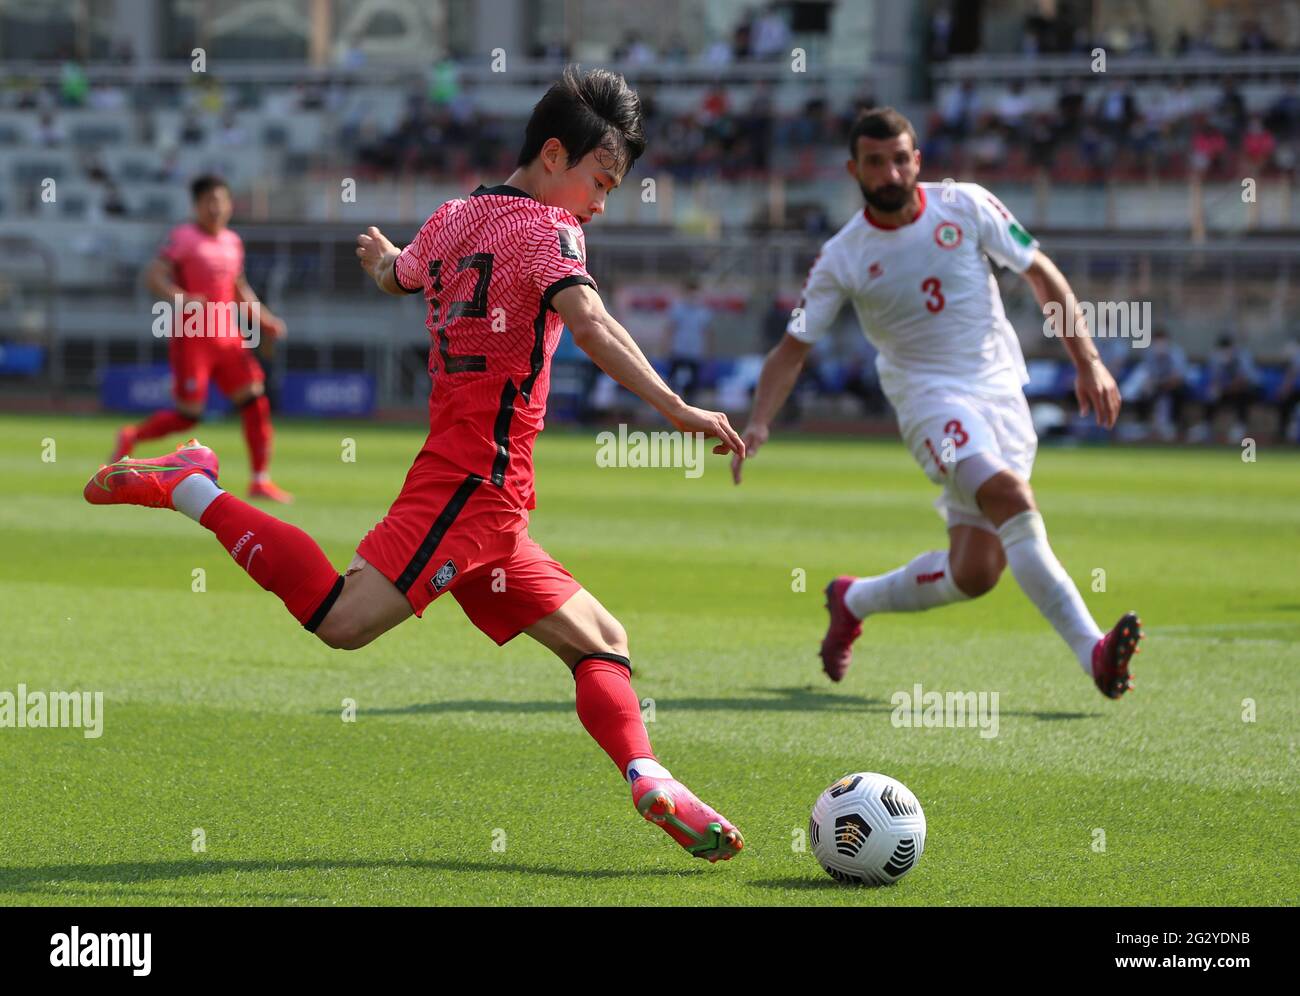 Goyang, South Korea. 13th June, 2021. Kim Moonhwan (L) of South Korea competes during a Group H match between South Korea and Lebanon at FIFA World Cup Qatar 2022 and AFC Asian Cup China 2023 Preliminary Joint Qualification Round 2 in Goyang, South Korea, June 13, 2021. Credit: Wang Jingqiang/Xinhua/Alamy Live News Stock Photo